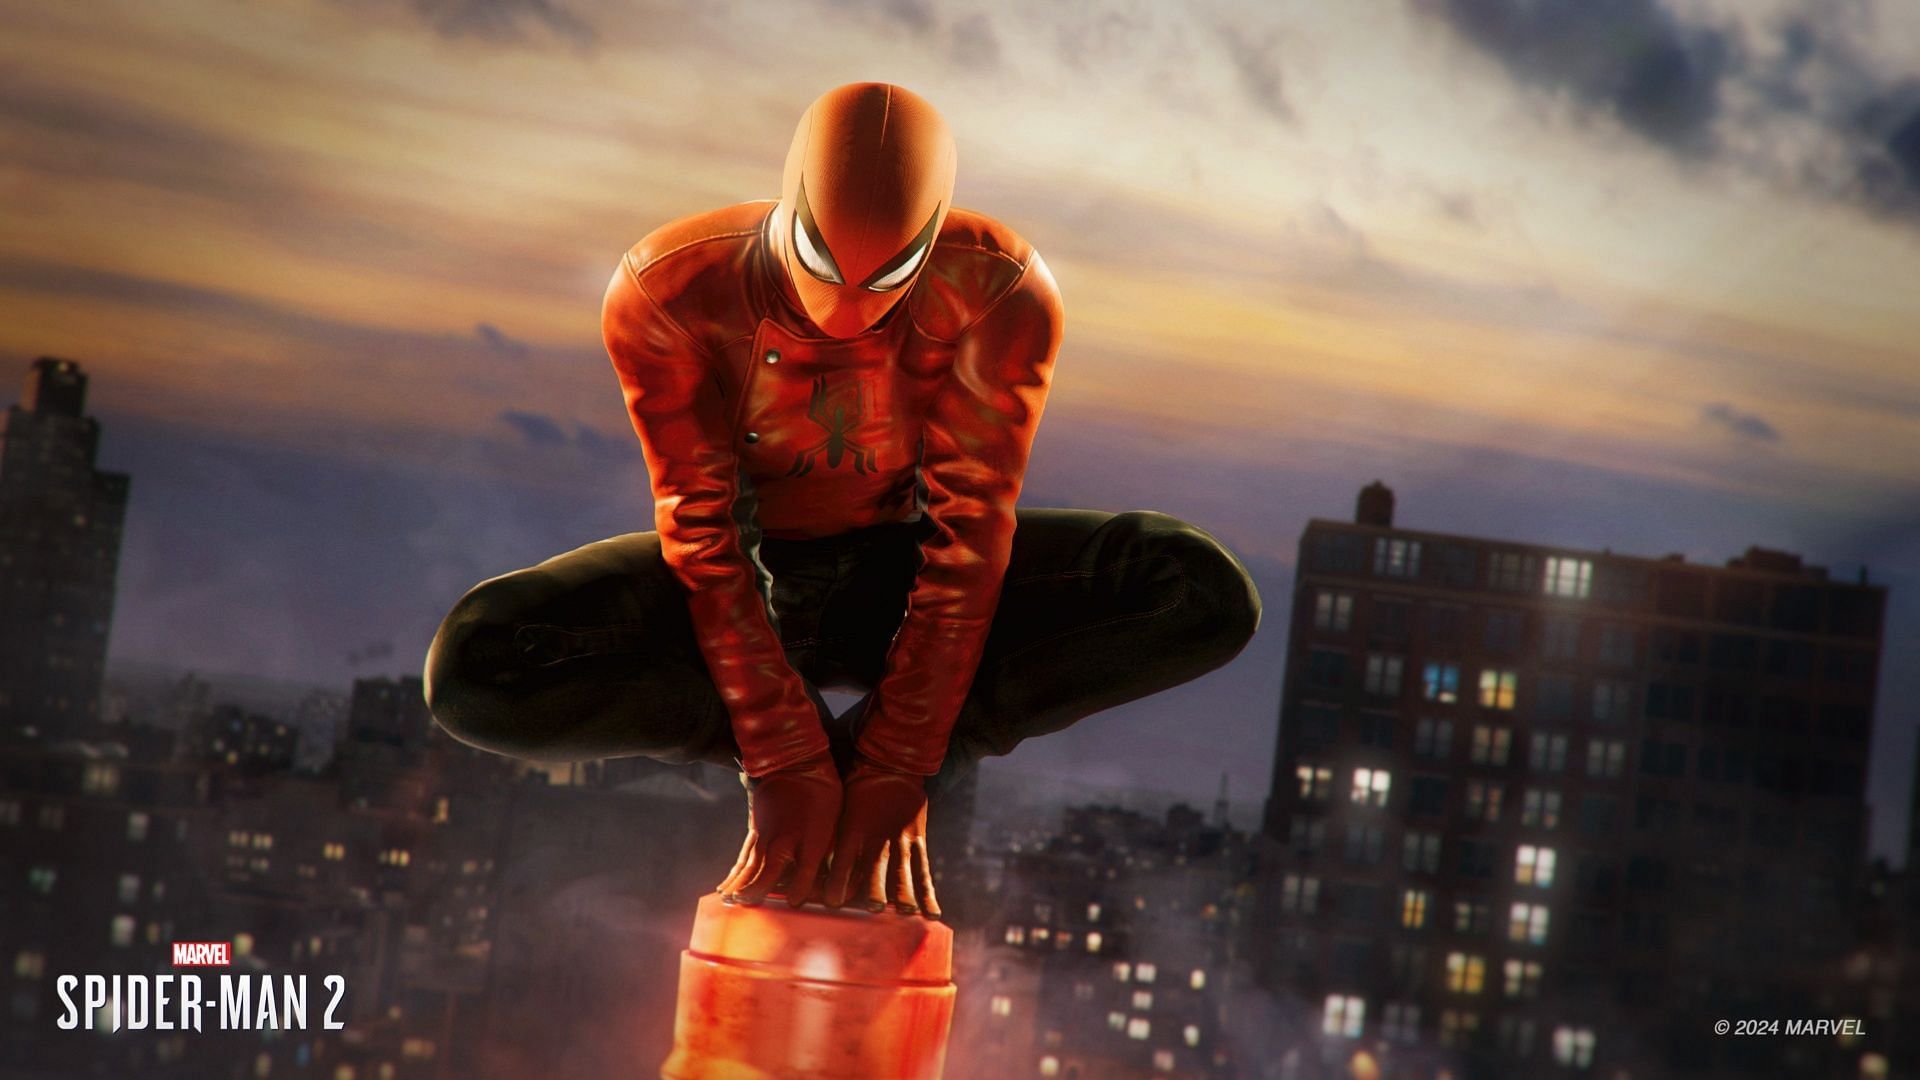 Spider-Man 2 update version 1.003.000 release notes revealed (Image via Sony)